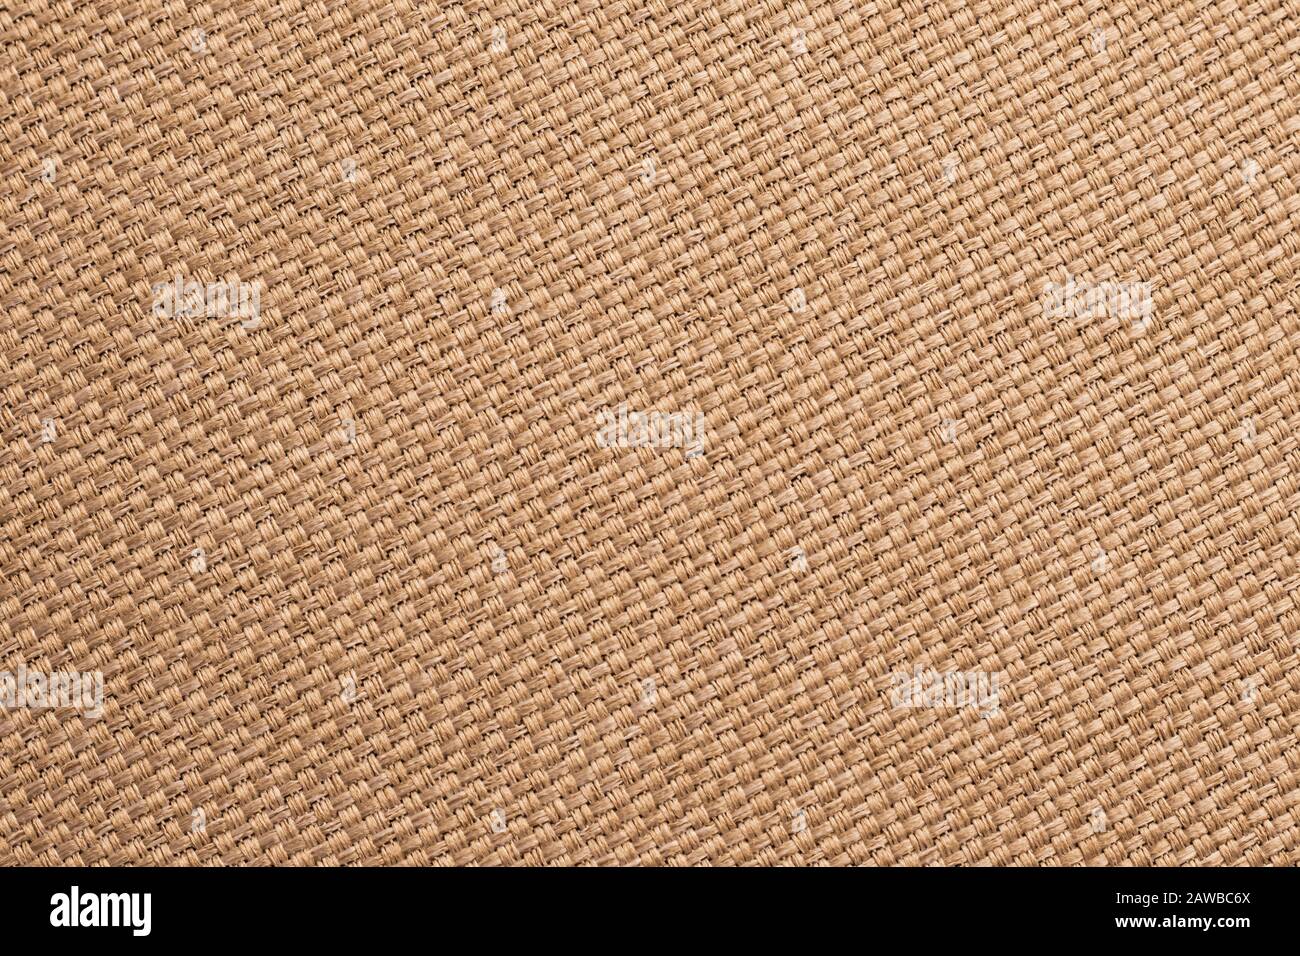 Texture of burlap, brown woven fabric background. Sackcloth surface, sacking material, bagging textile wallpaper close-up Stock Photo